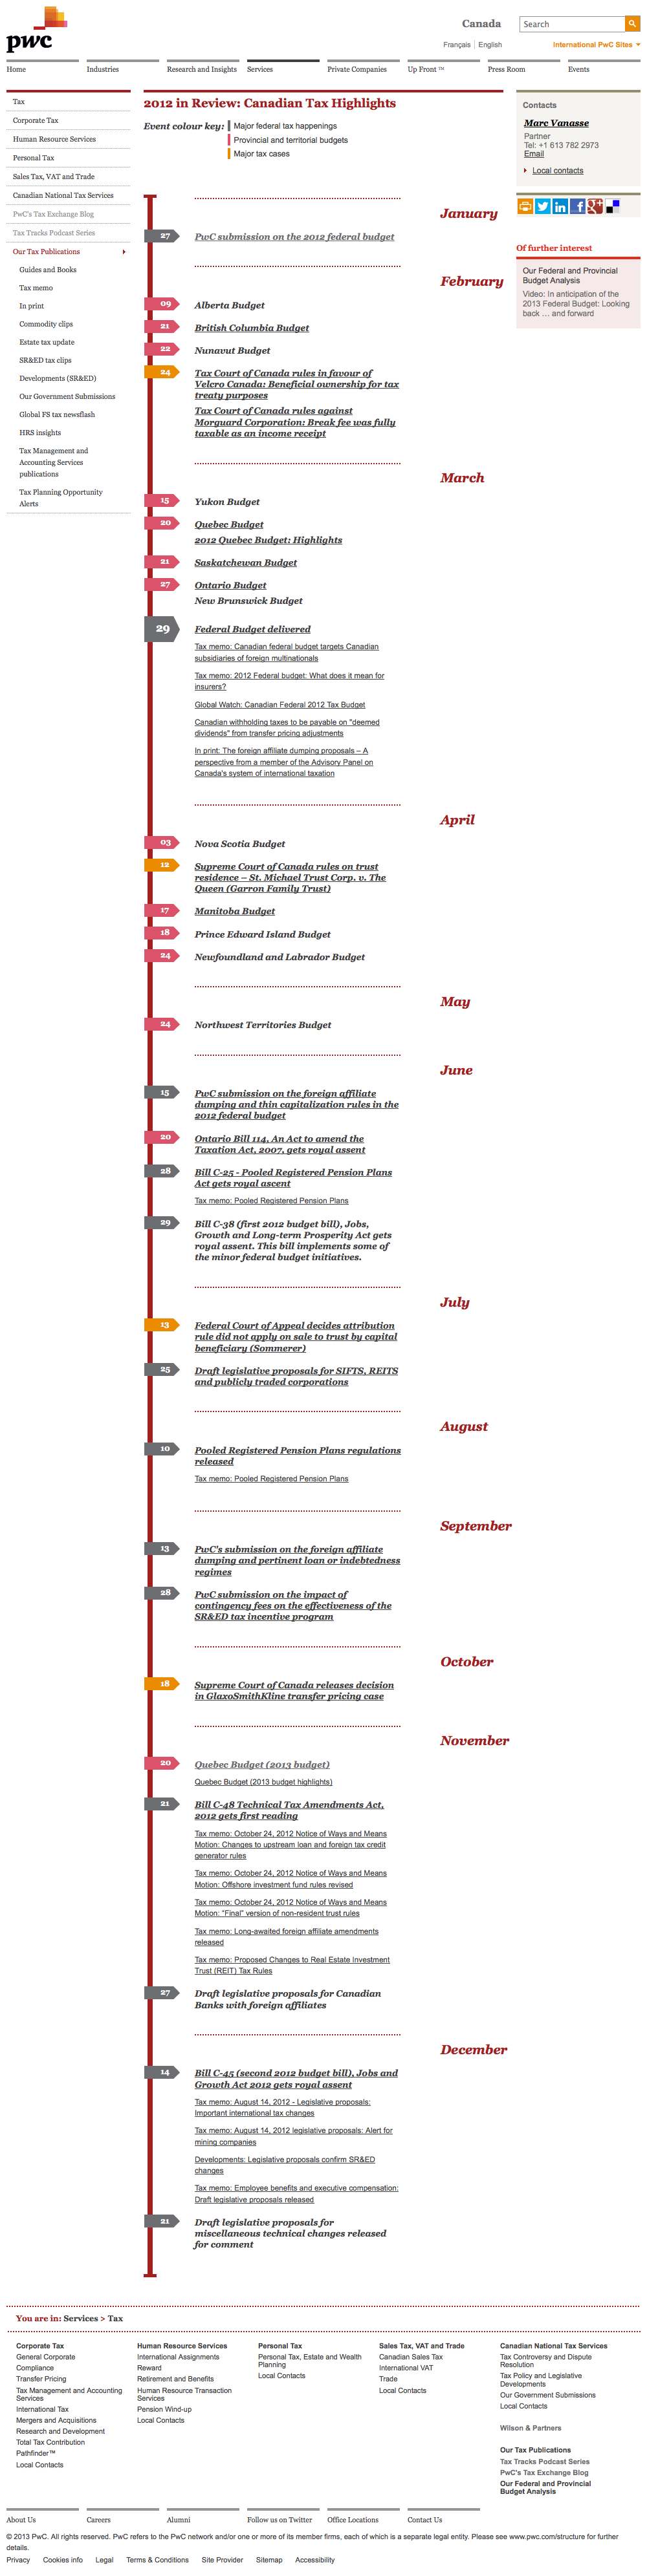 PwC Canada 2012 Tax Review Timeline